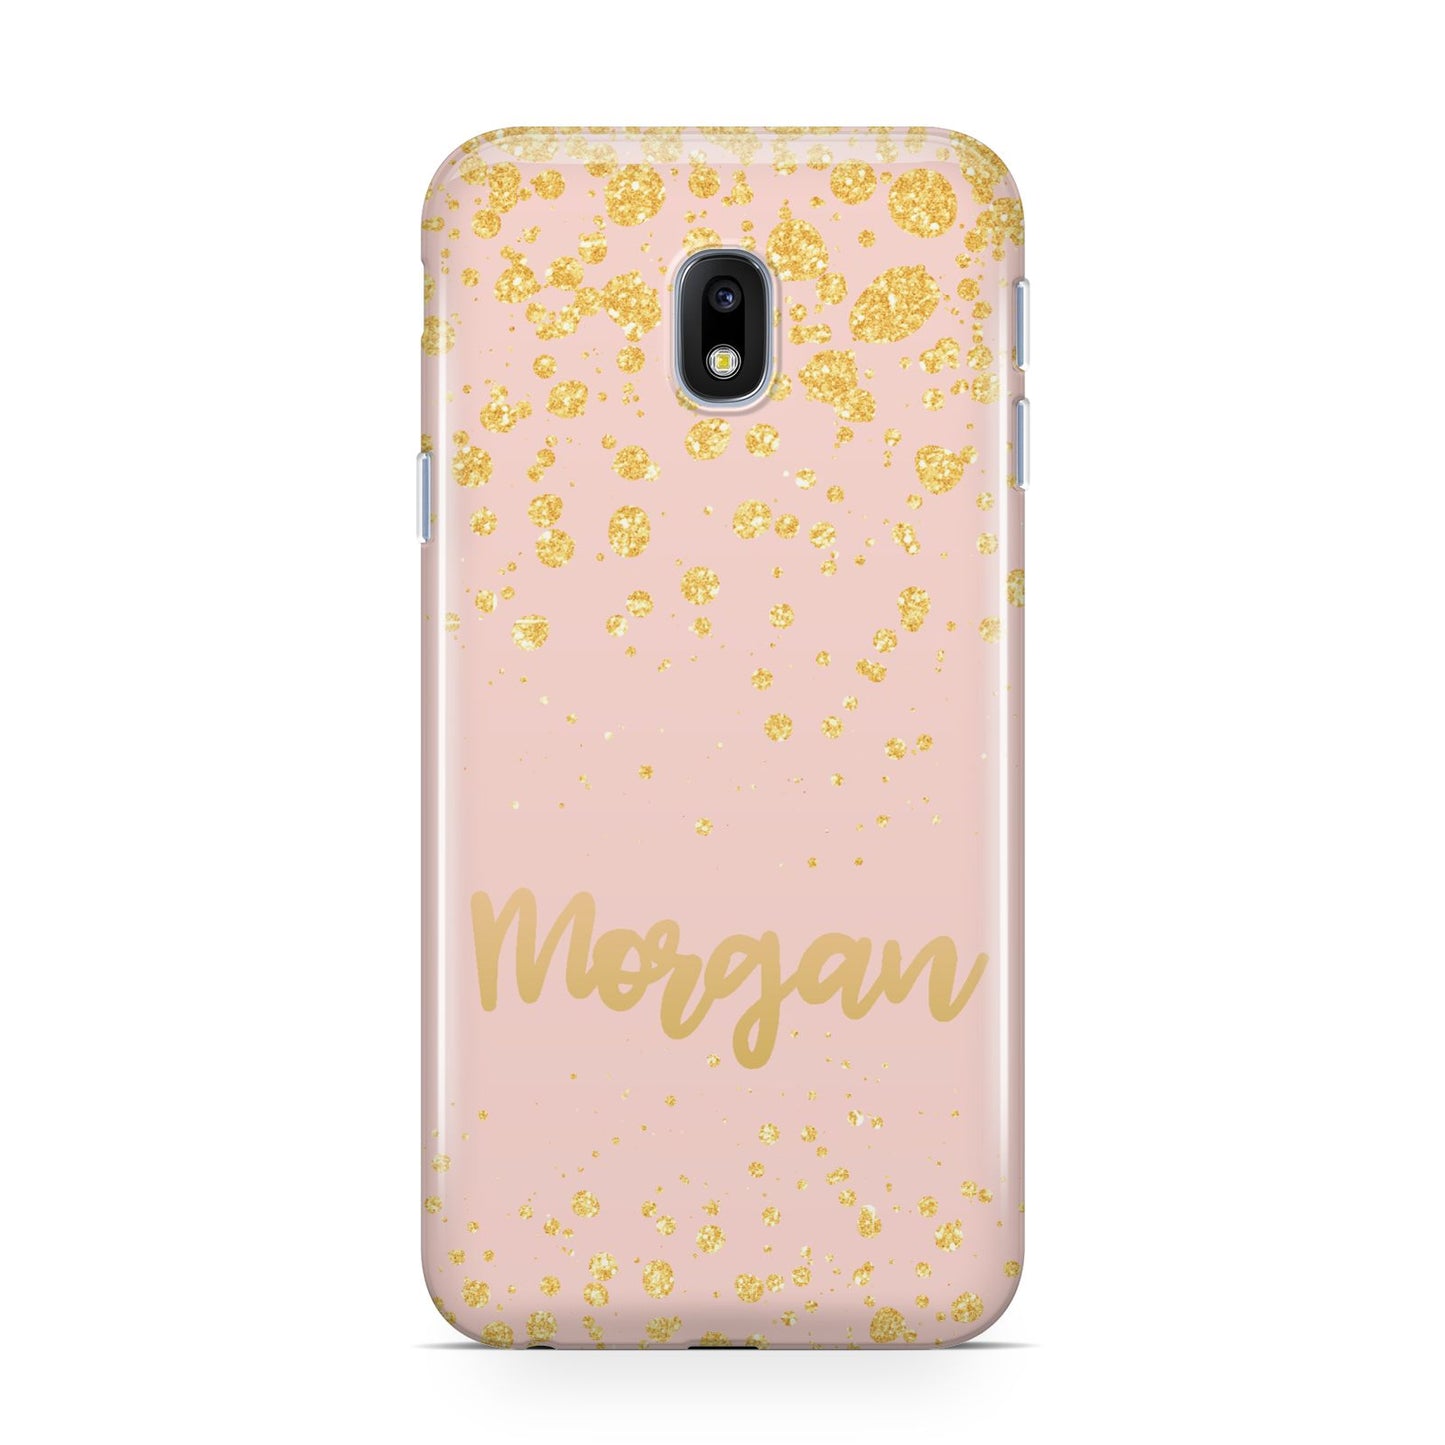 Personalised Pink Gold Splatter With Name Samsung Galaxy J3 2017 Case